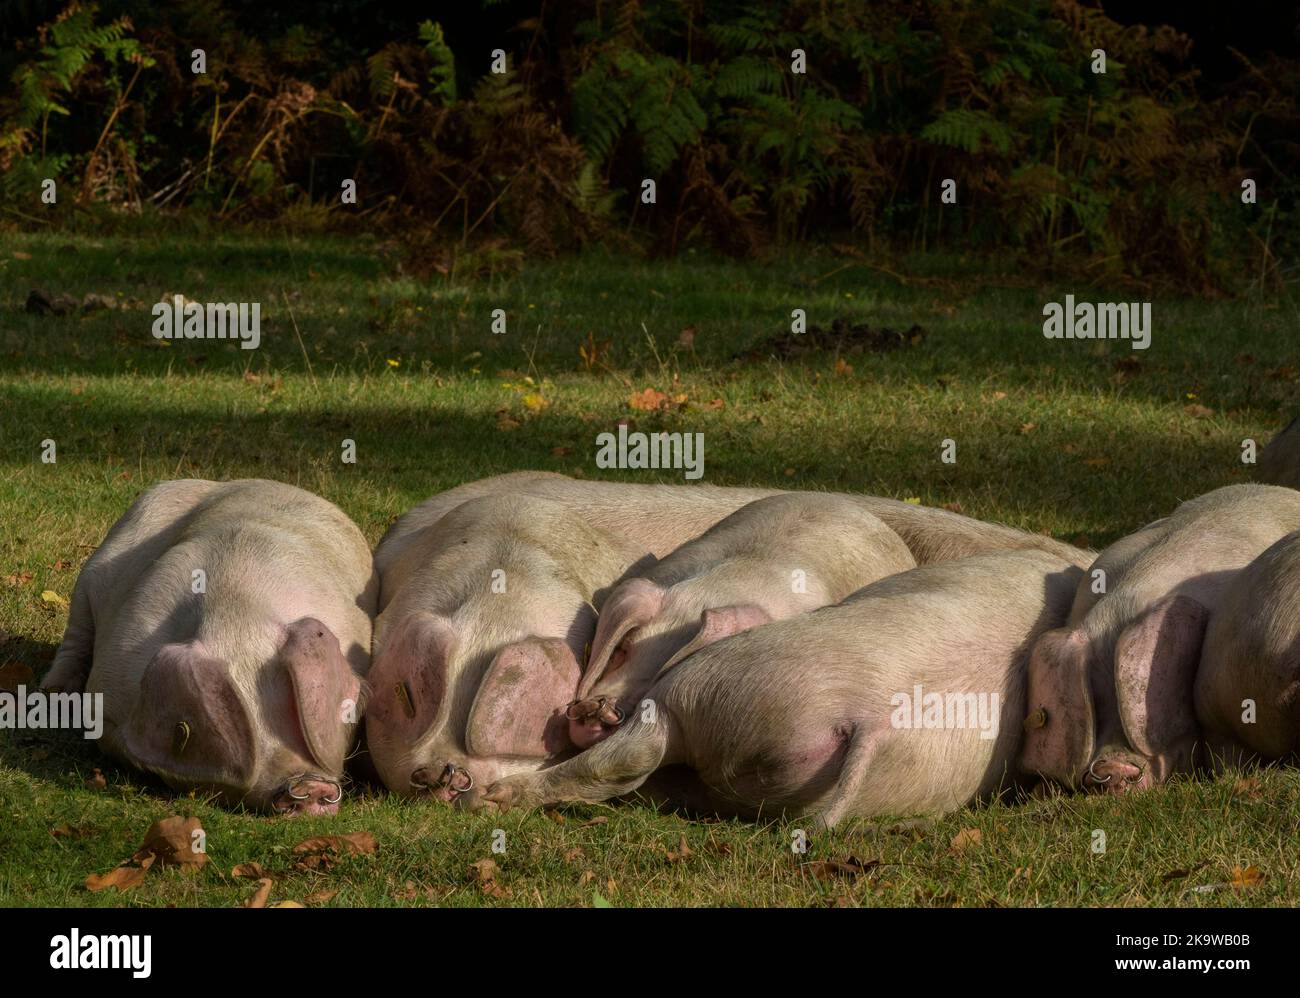 Gloucestershire Old Spot piglets near Minstead in the New Forest National Park, Hampshire. Autumn. Stock Photo